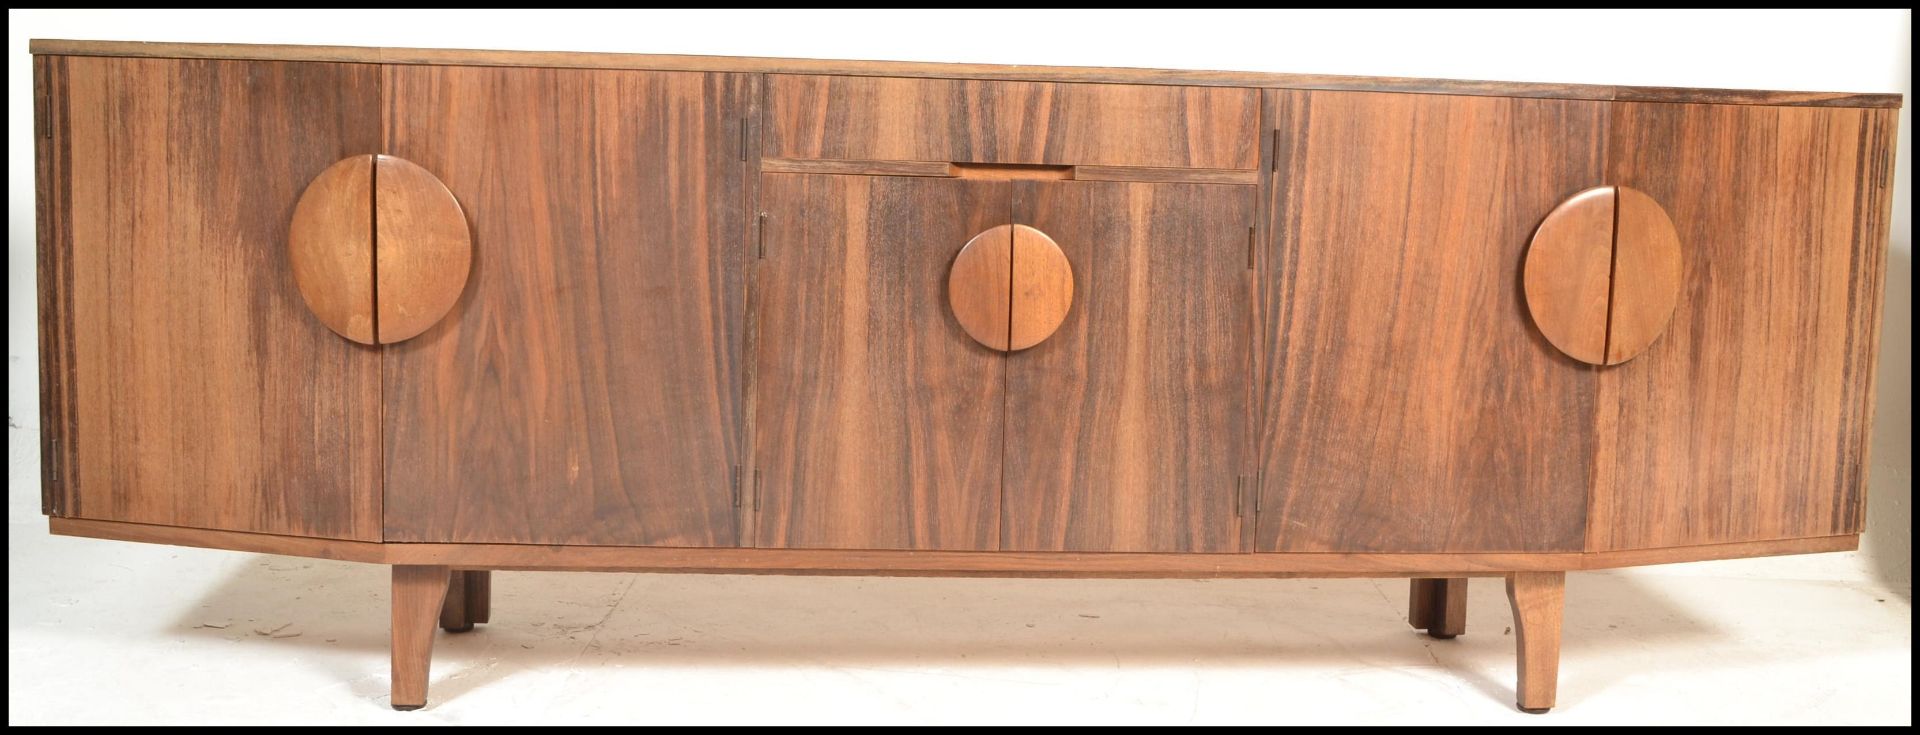 A retro mid century Danish Inspired crendenza sideboard. Raised on squared legs with a wide and deep